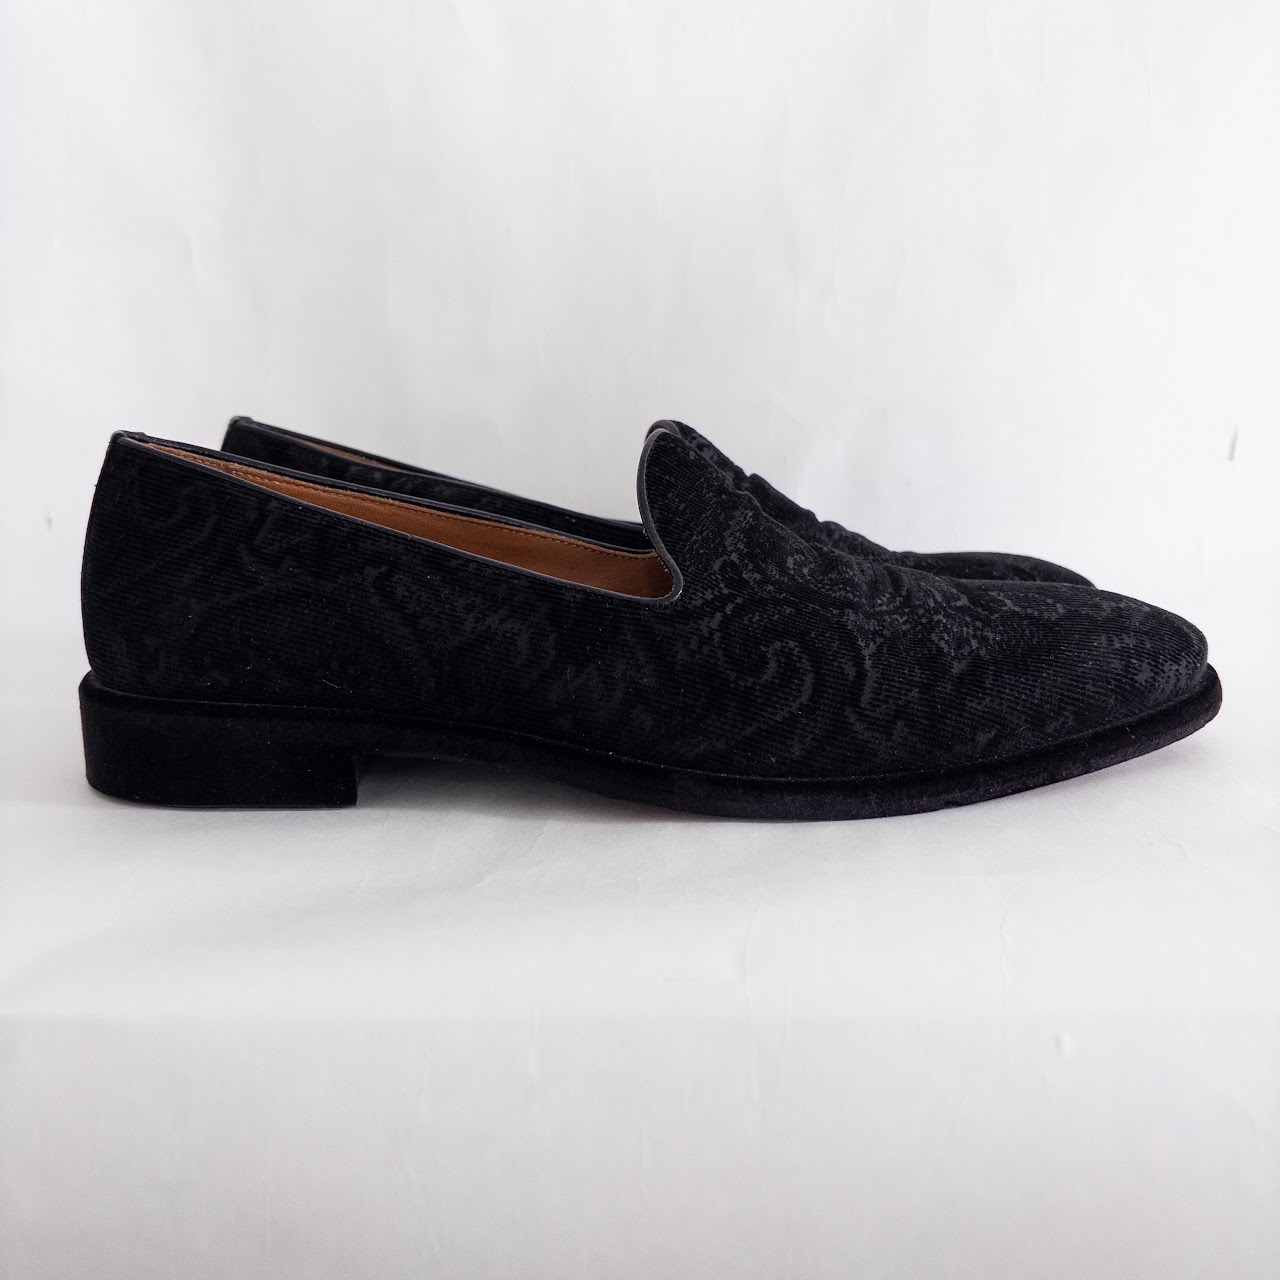 Etro Floral Paisley Velvet Loafers